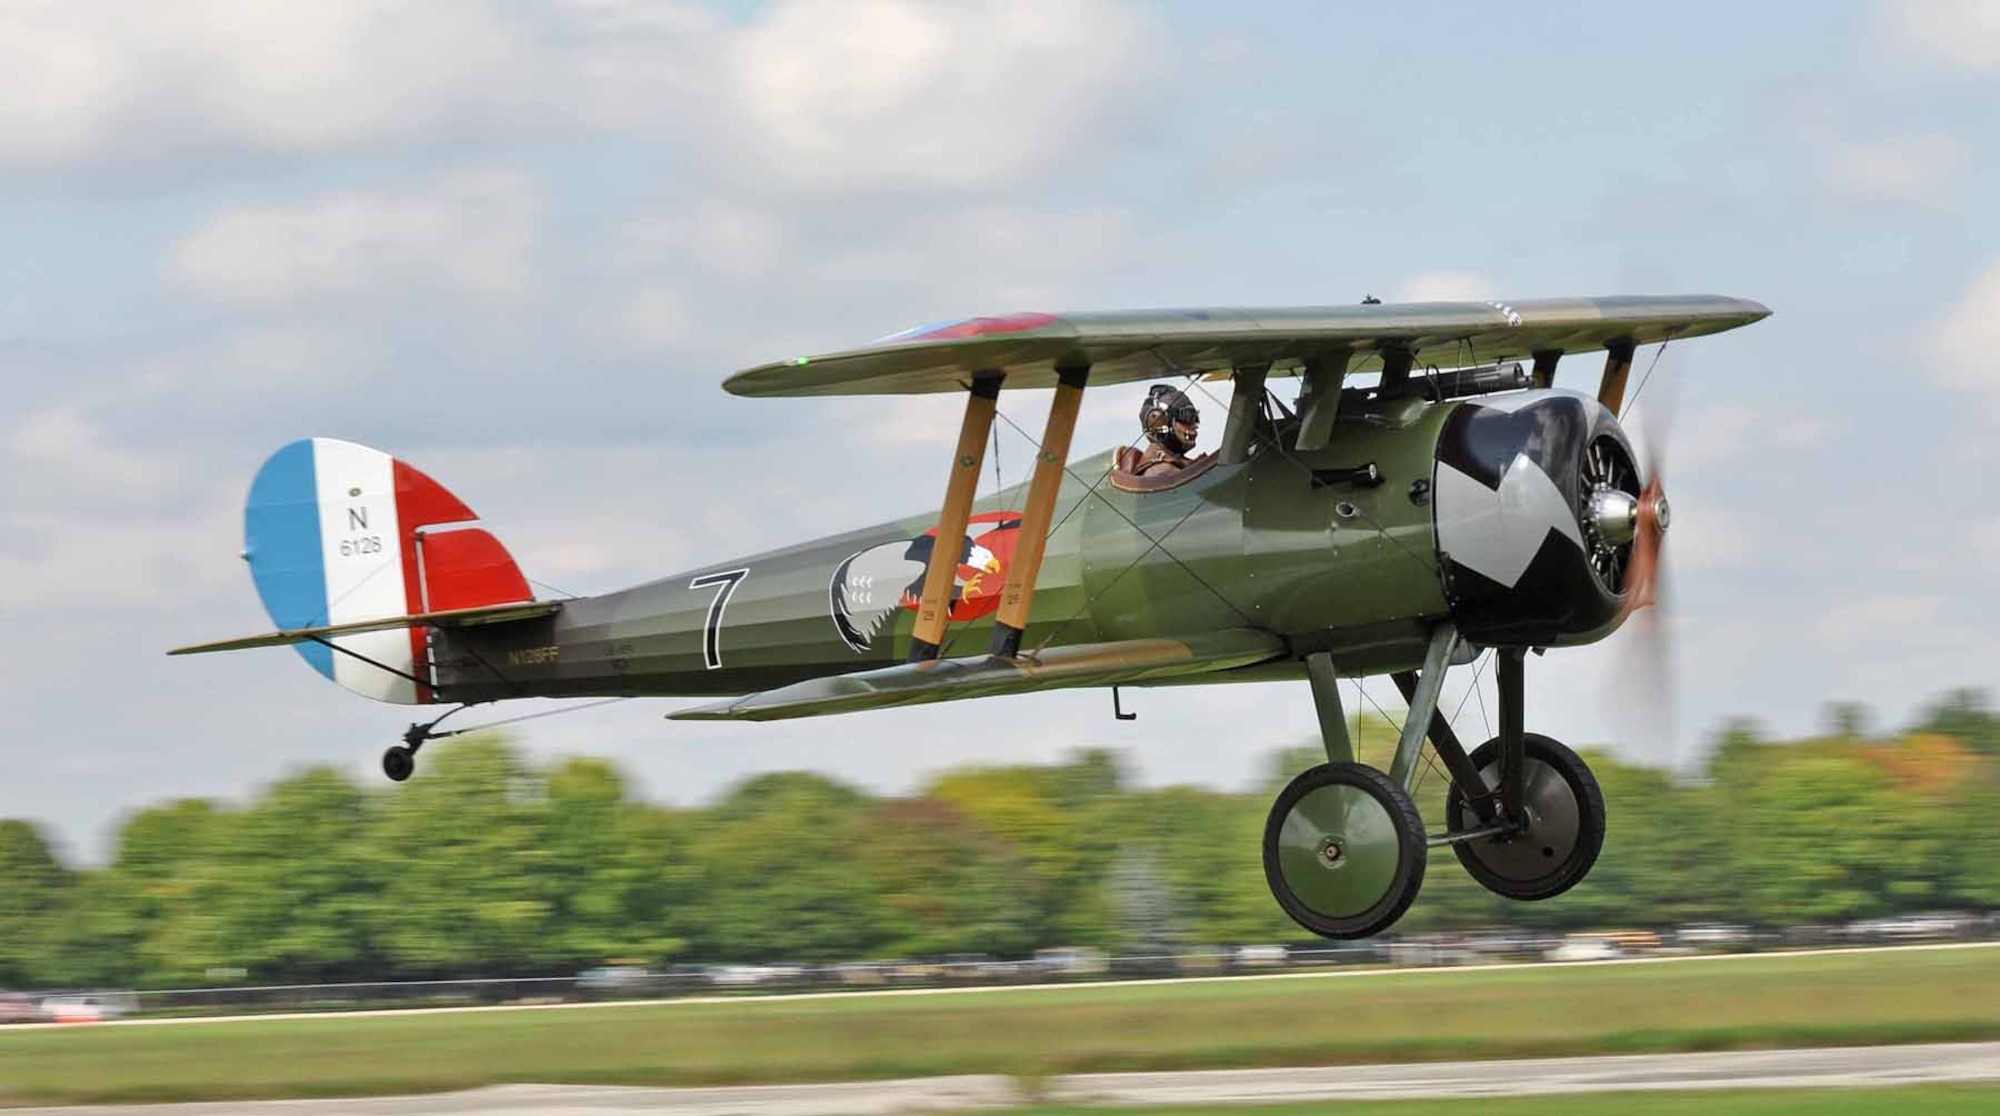 World War I aircraft took to the skies during the World War I Dawn Patrol Rendezvous in 2011 at the National Museum of the U.S. Air Force near Dayton, Ohio. This year's event is scheduled to take place Sept. 27-28. (Courtesy photo/Bob Punch)